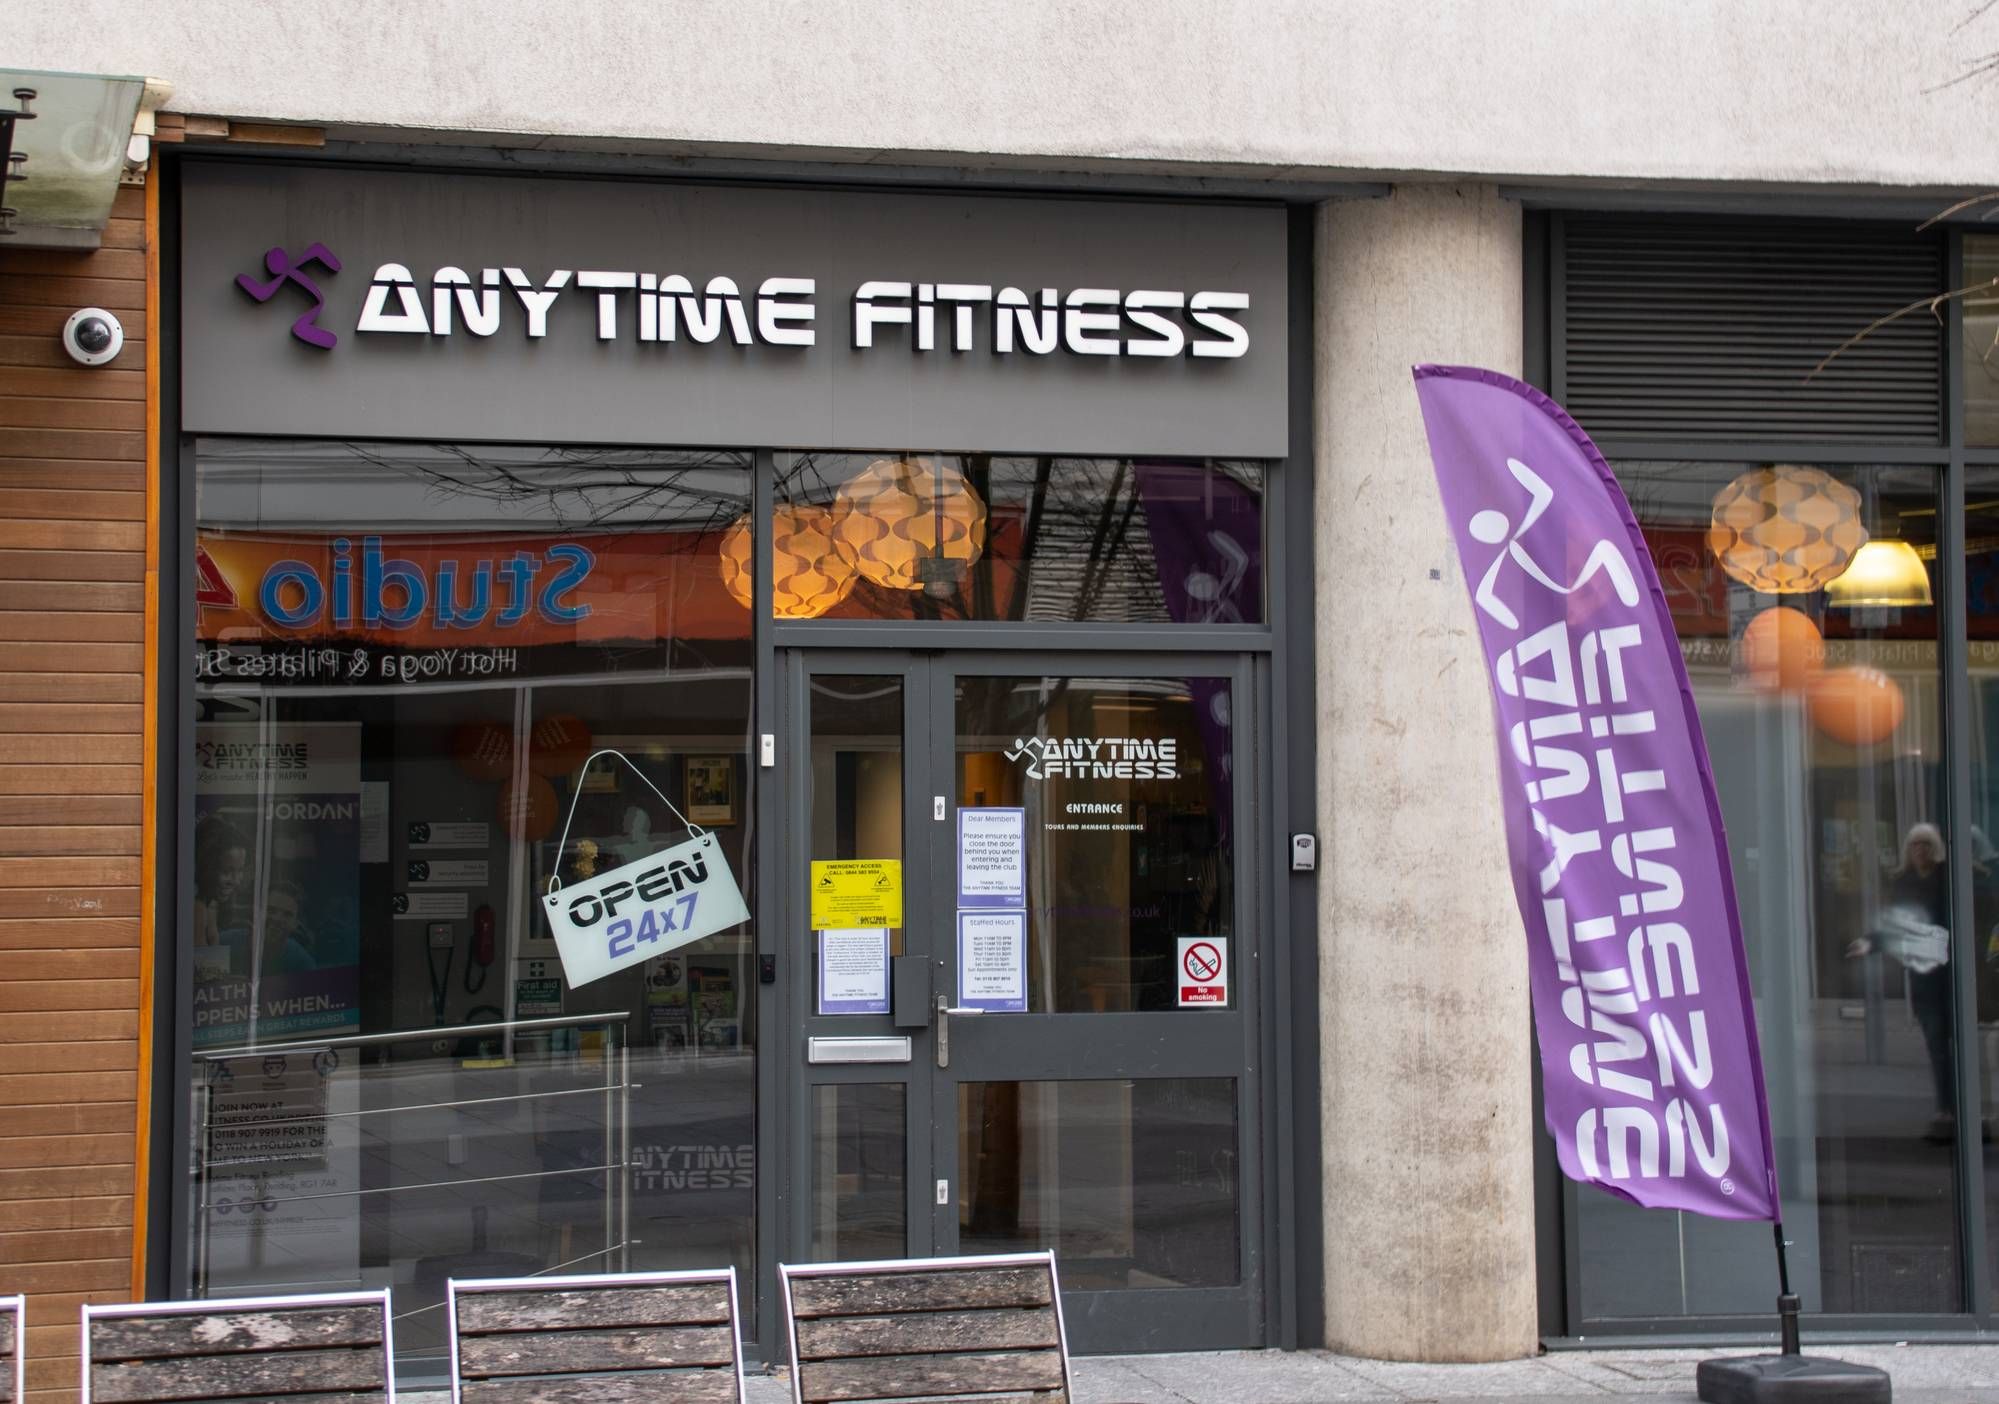 Anytime Fitness has sued its insurer, arguing that they deserve more COVID-19 coverage.